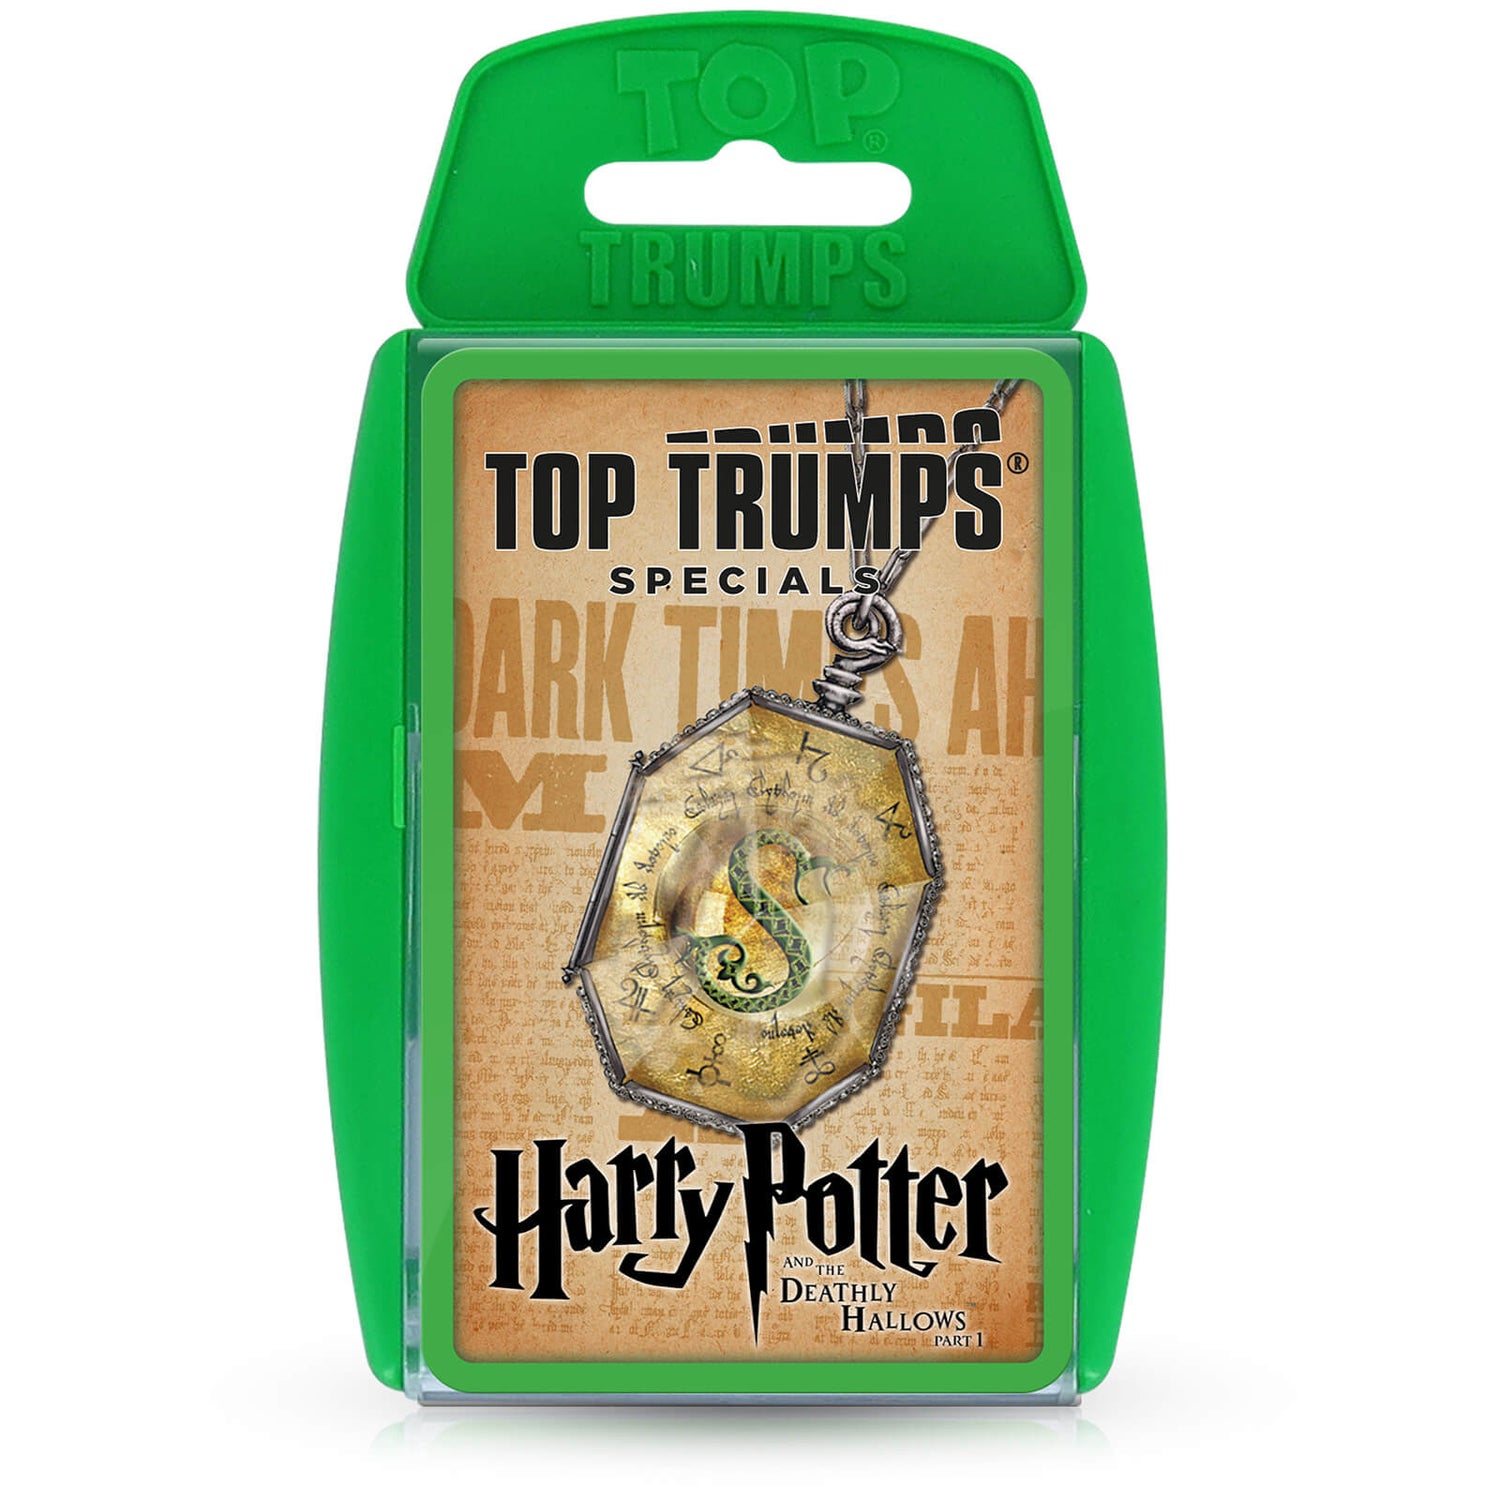 Top Trumps Specials - Harry Potter and The Deathly Hallows 1 Edition